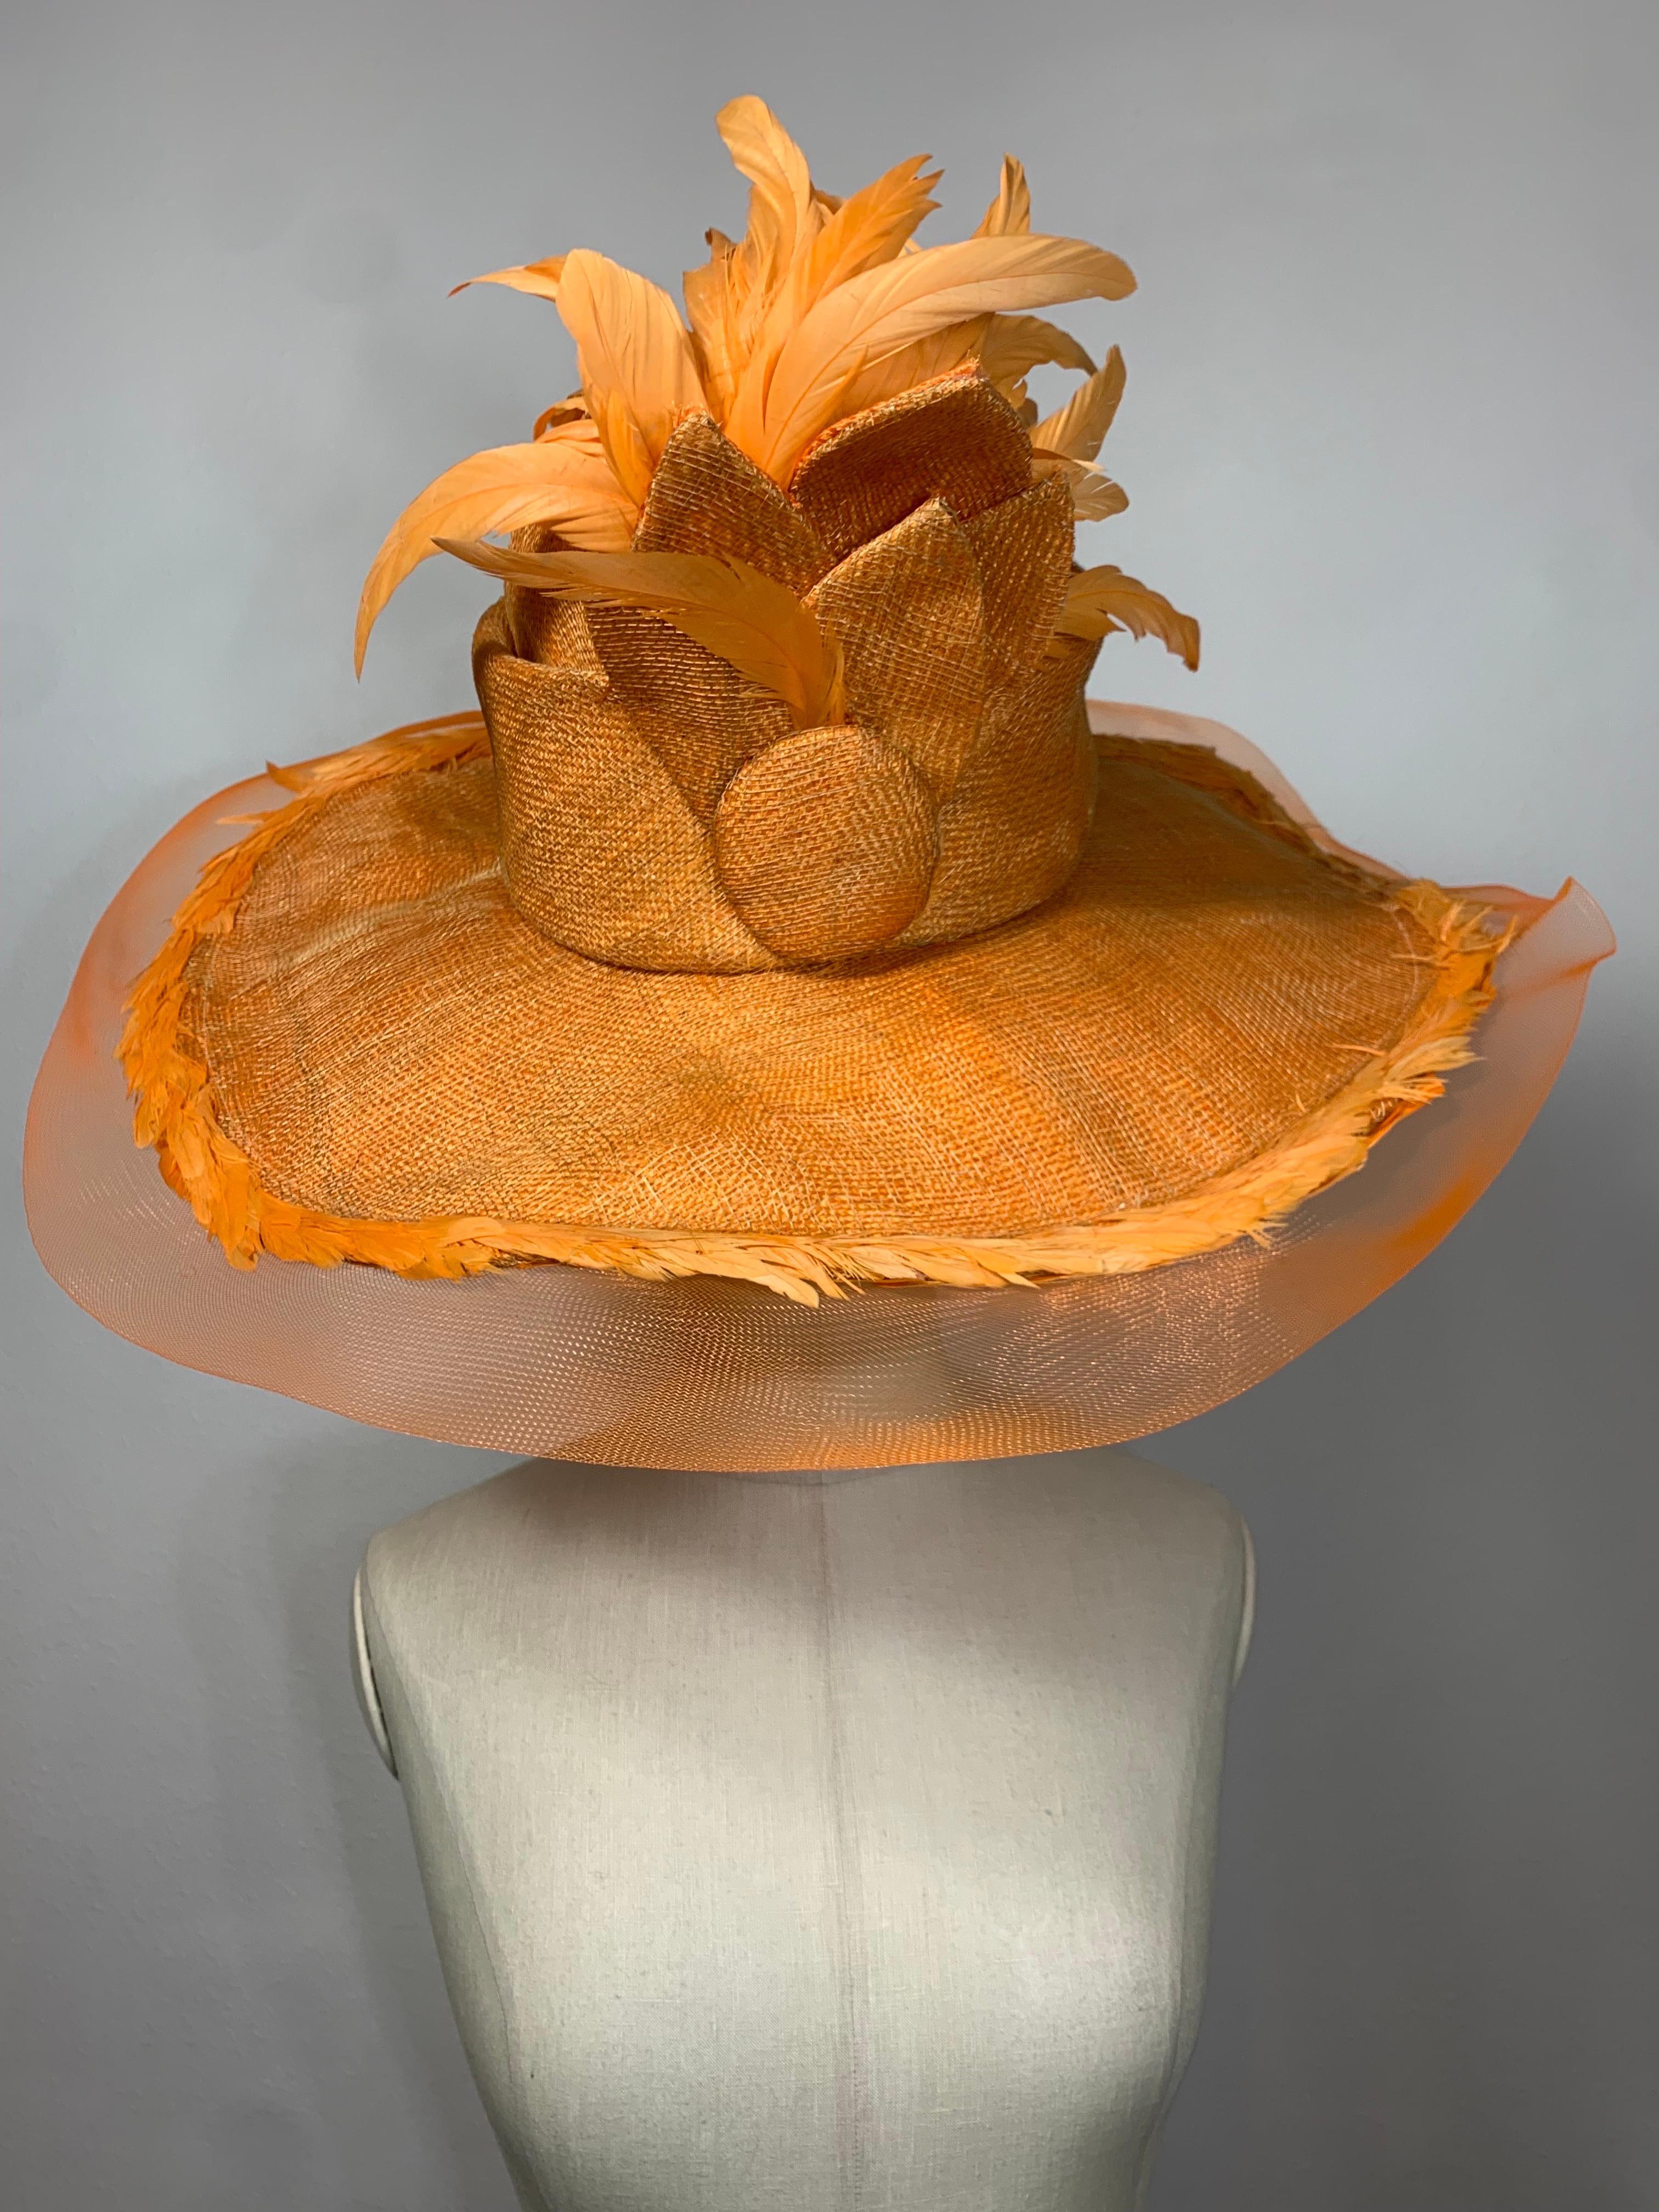 Susan van der Linde Orange Wide-Brim Straw Hat w Sheer Horsehair Rim & Feathers at Crown:  Rounded high crown is banded with a rosette of straw leaves and beautiful orange cream color coque feathers. Wide brim is edged in coordinating horsehair